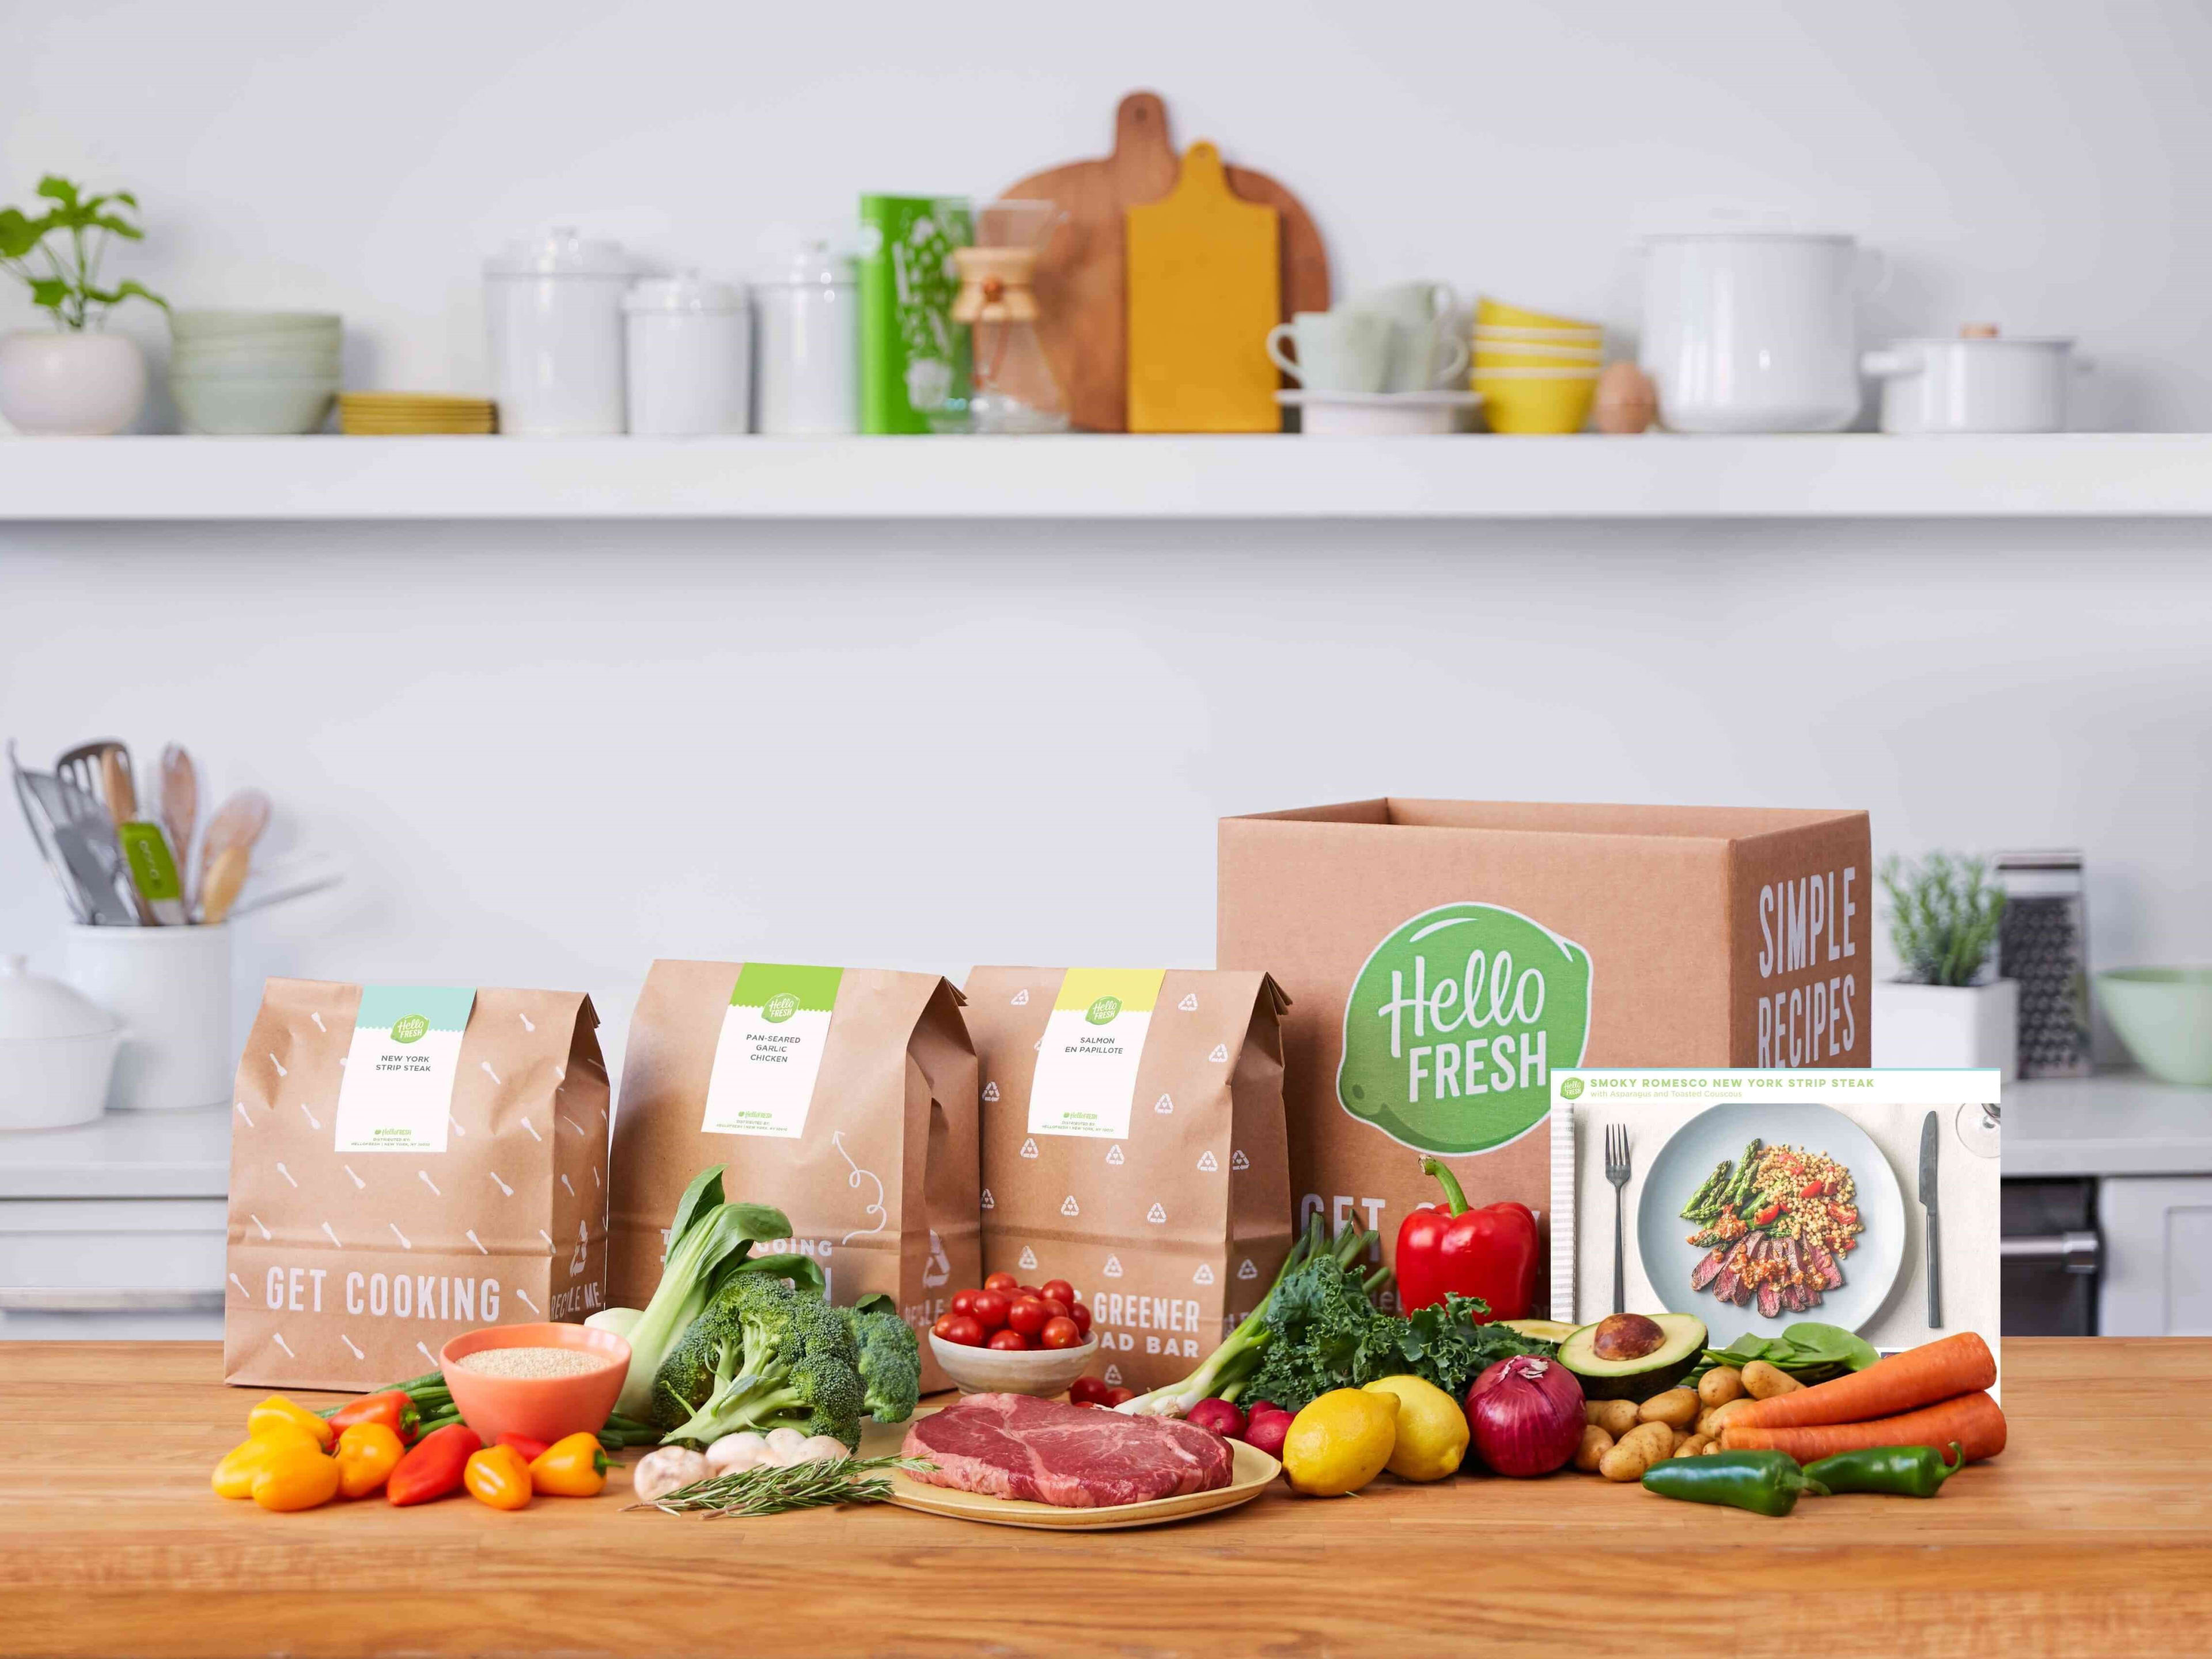 The Meal Delivery Service That Aims to Protect Our Planet